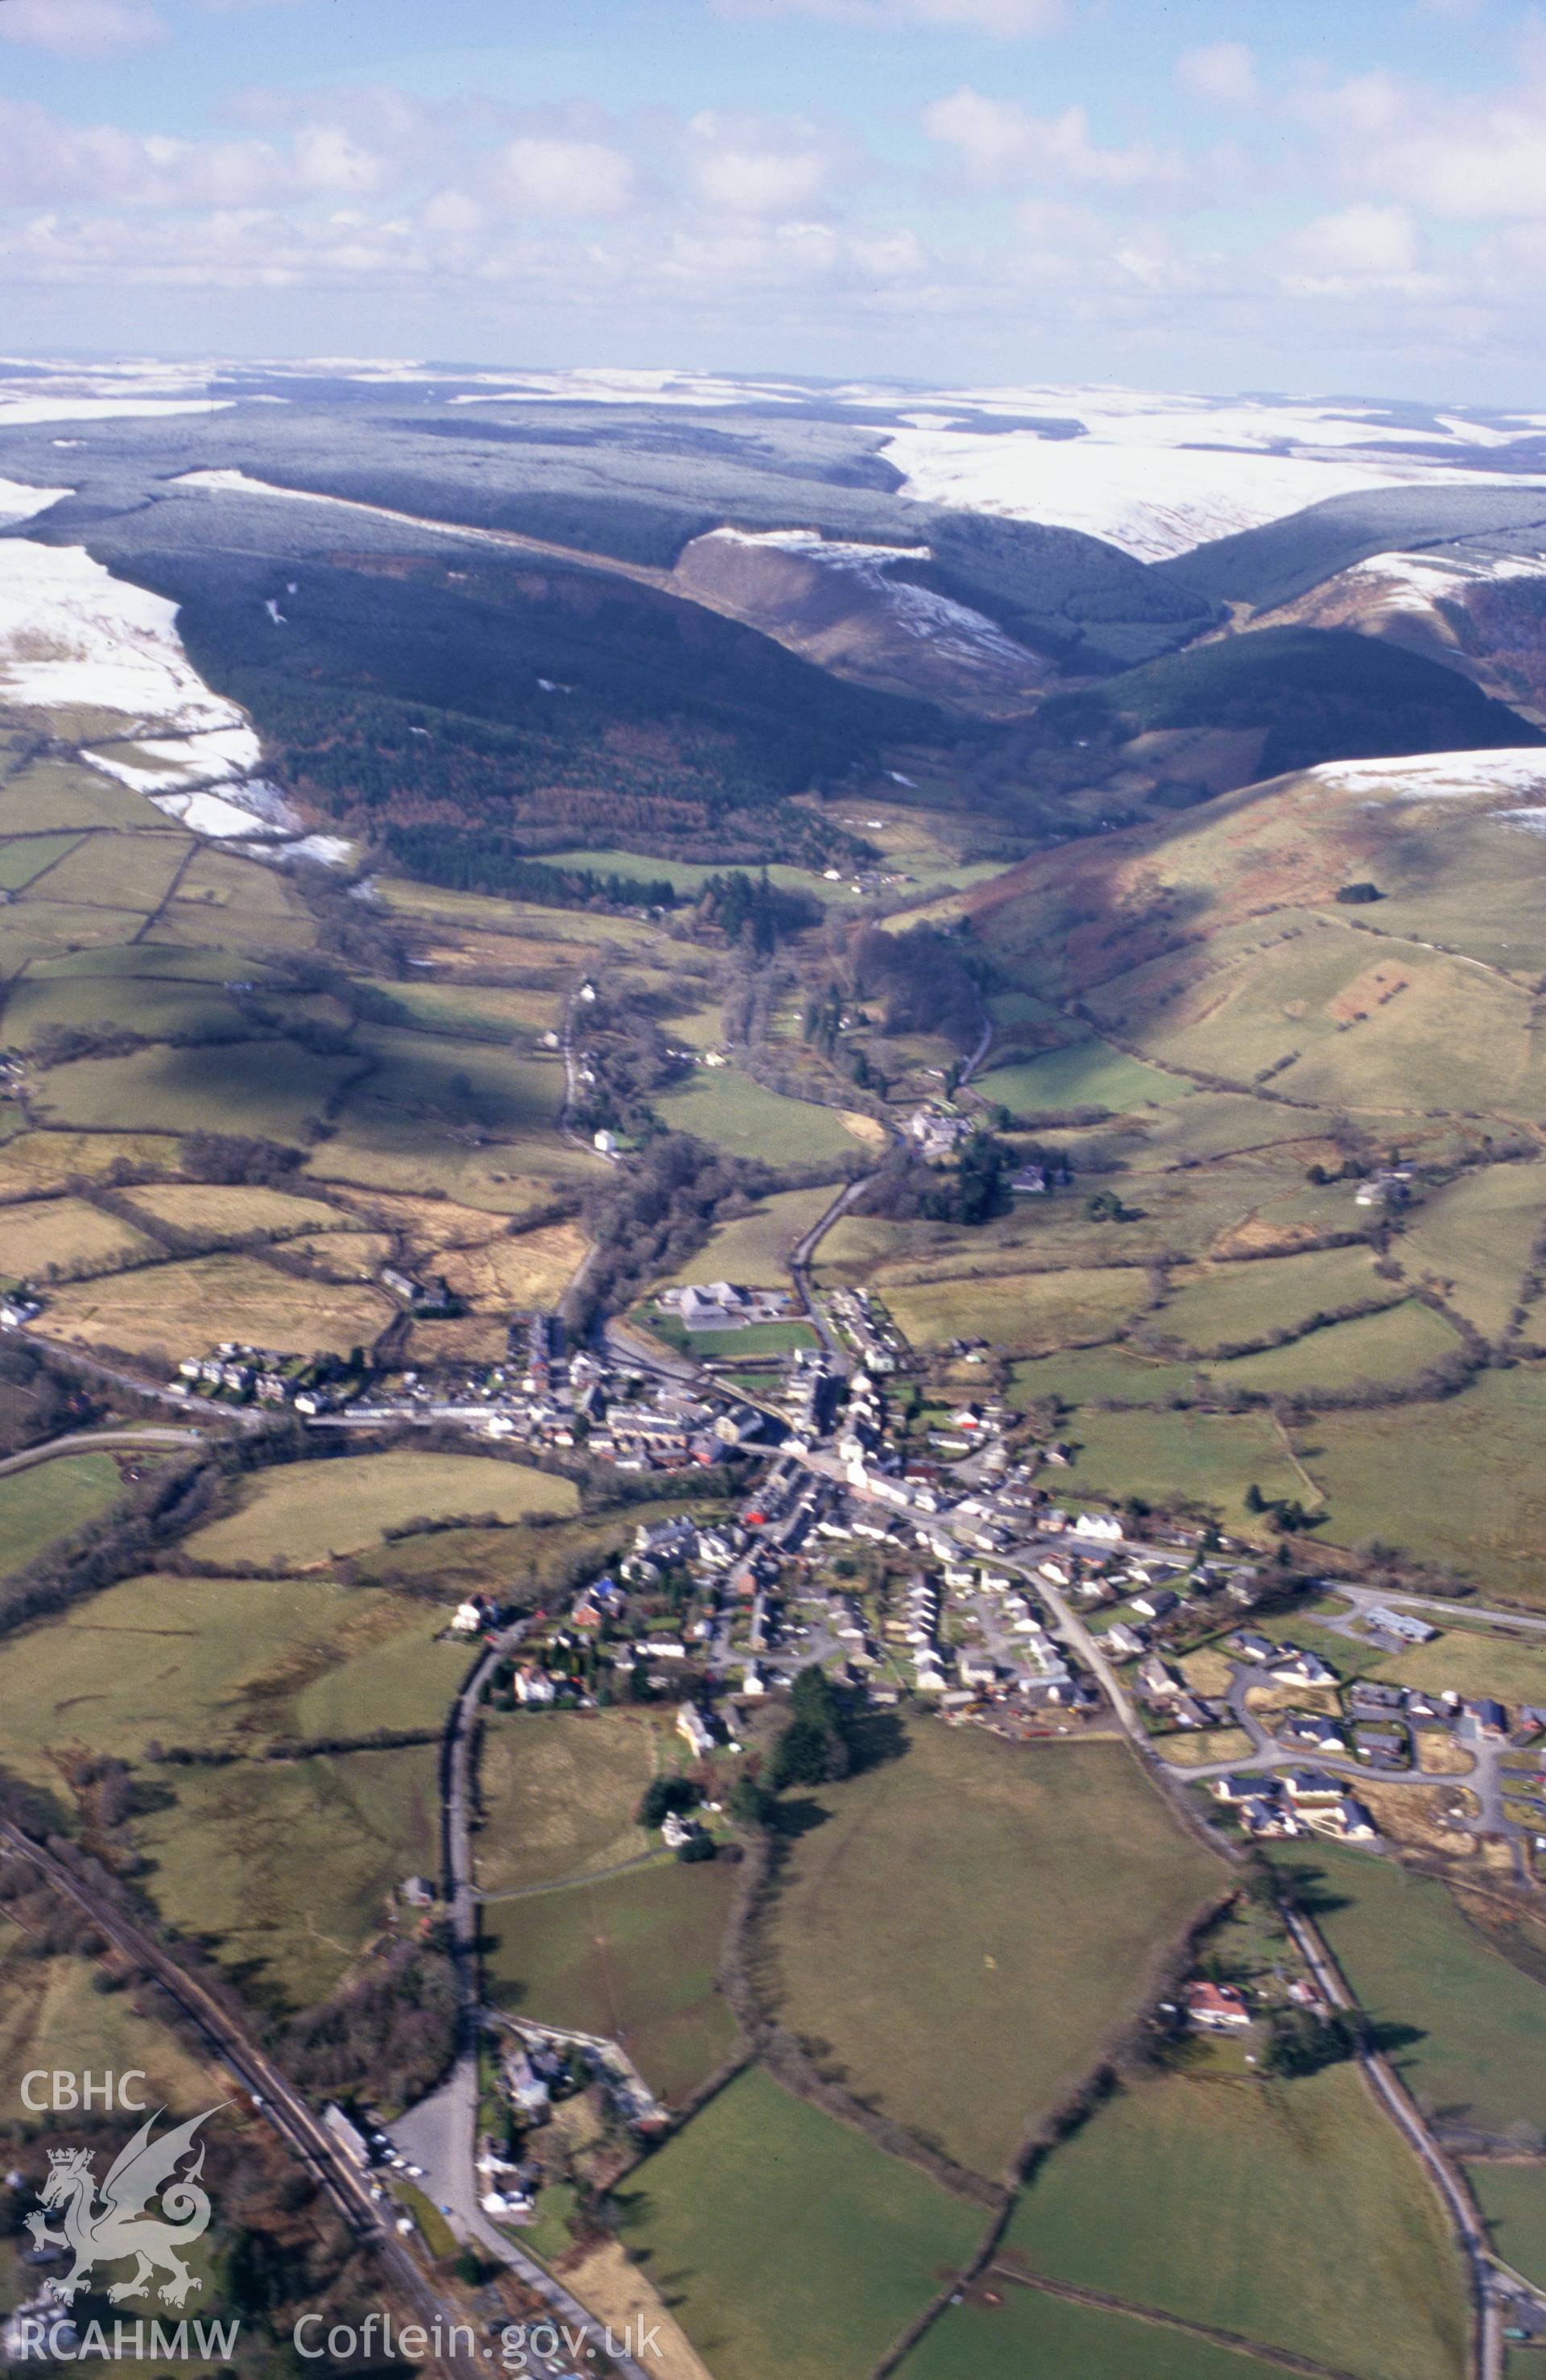 Slide of RCAHMW colour oblique aerial photograph of Llanwrtyd Wells taken by T.G. Driver, 2001.